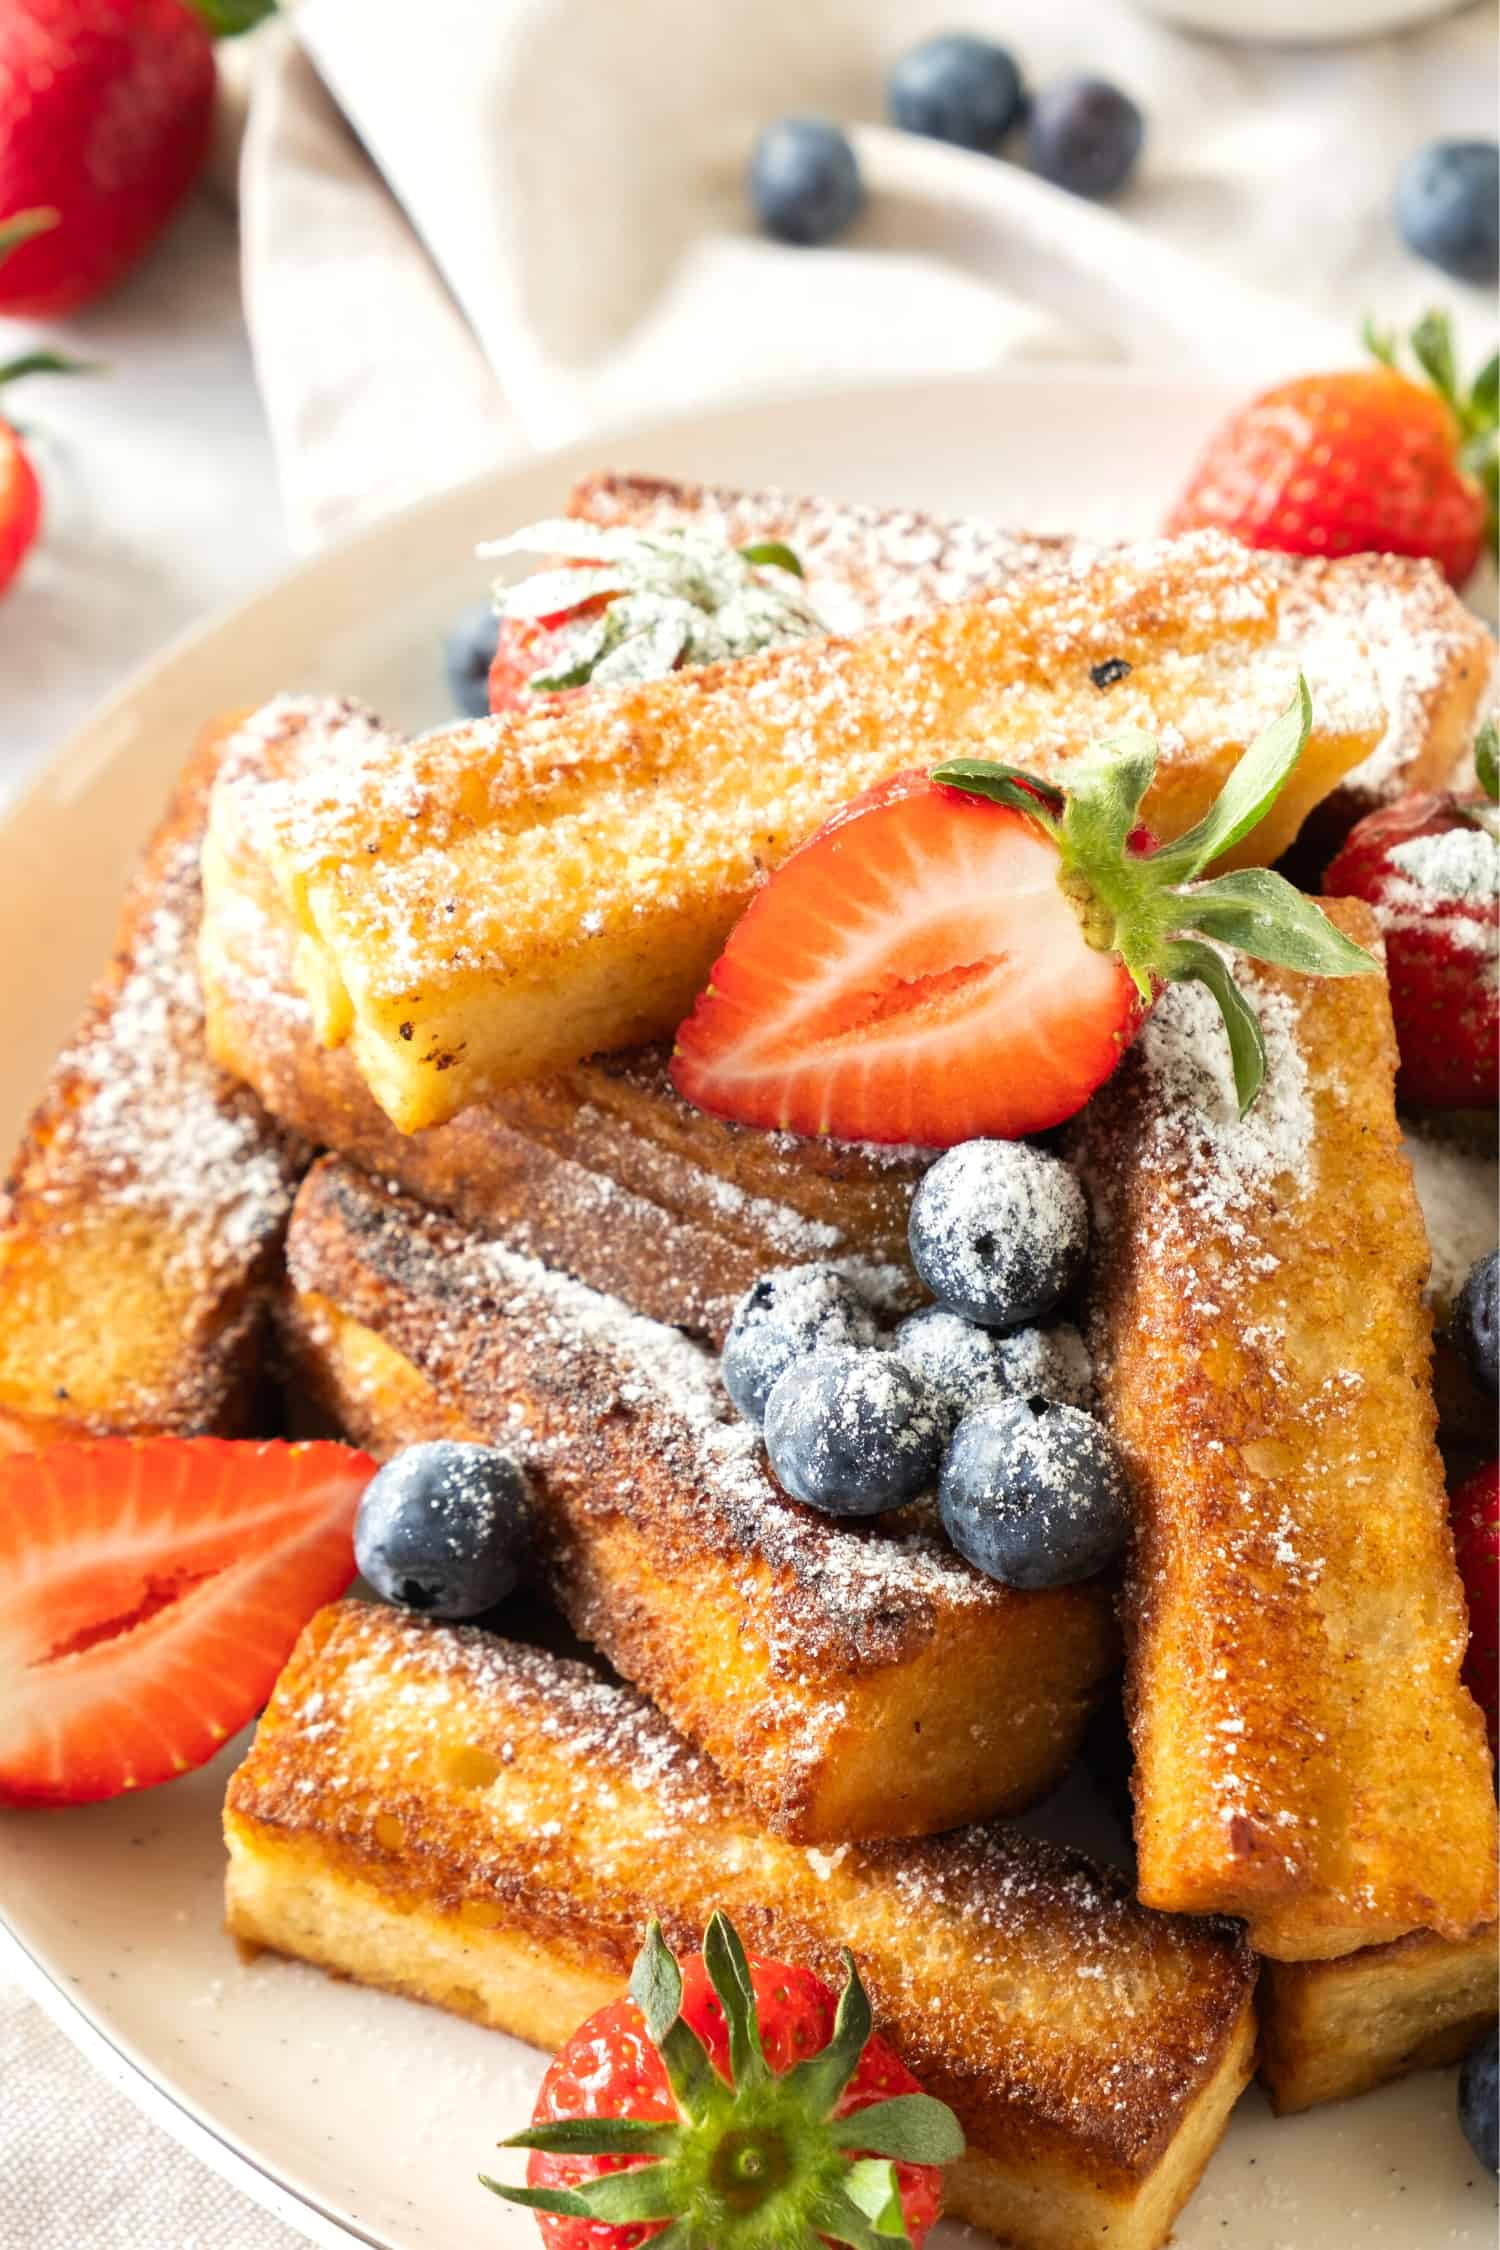 A plate of gluten free French toast sticks and berries sprinkled in powdered sugar.